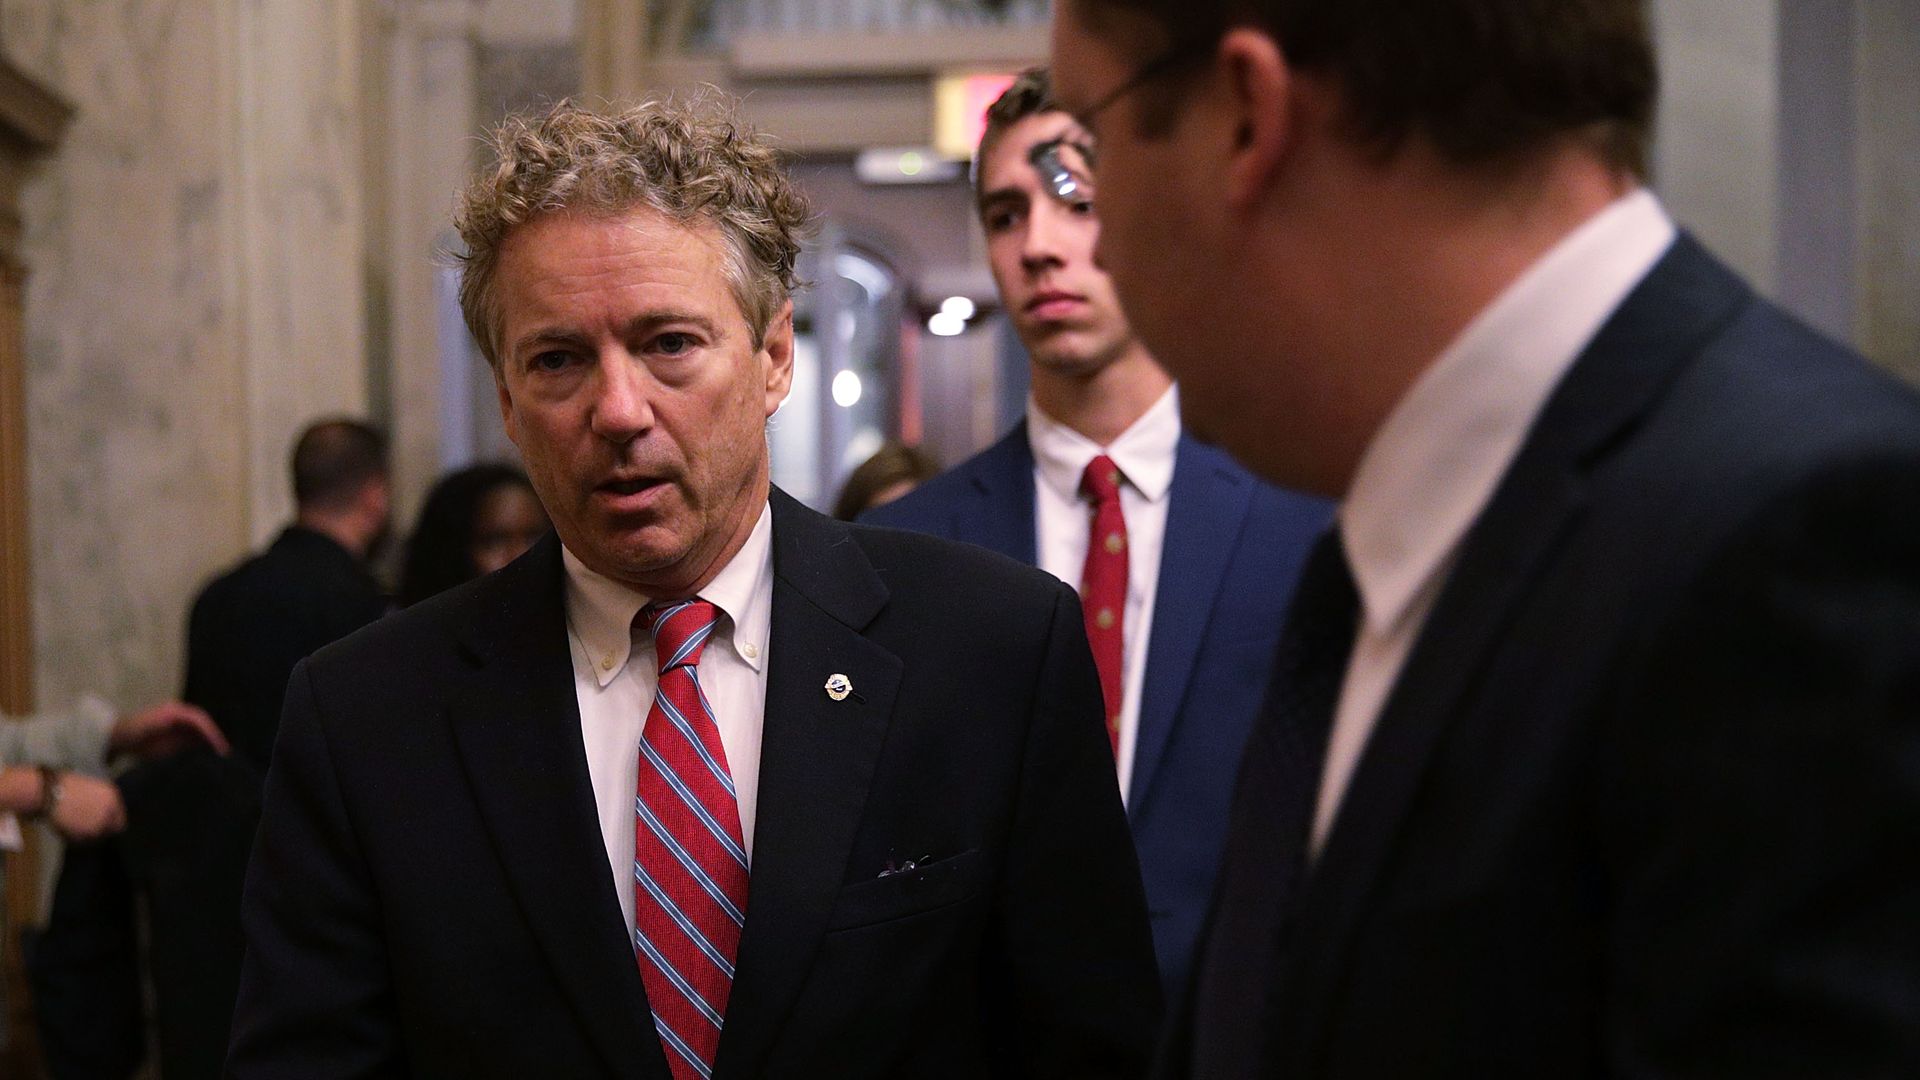 Rand Paul in suit and red tie. 